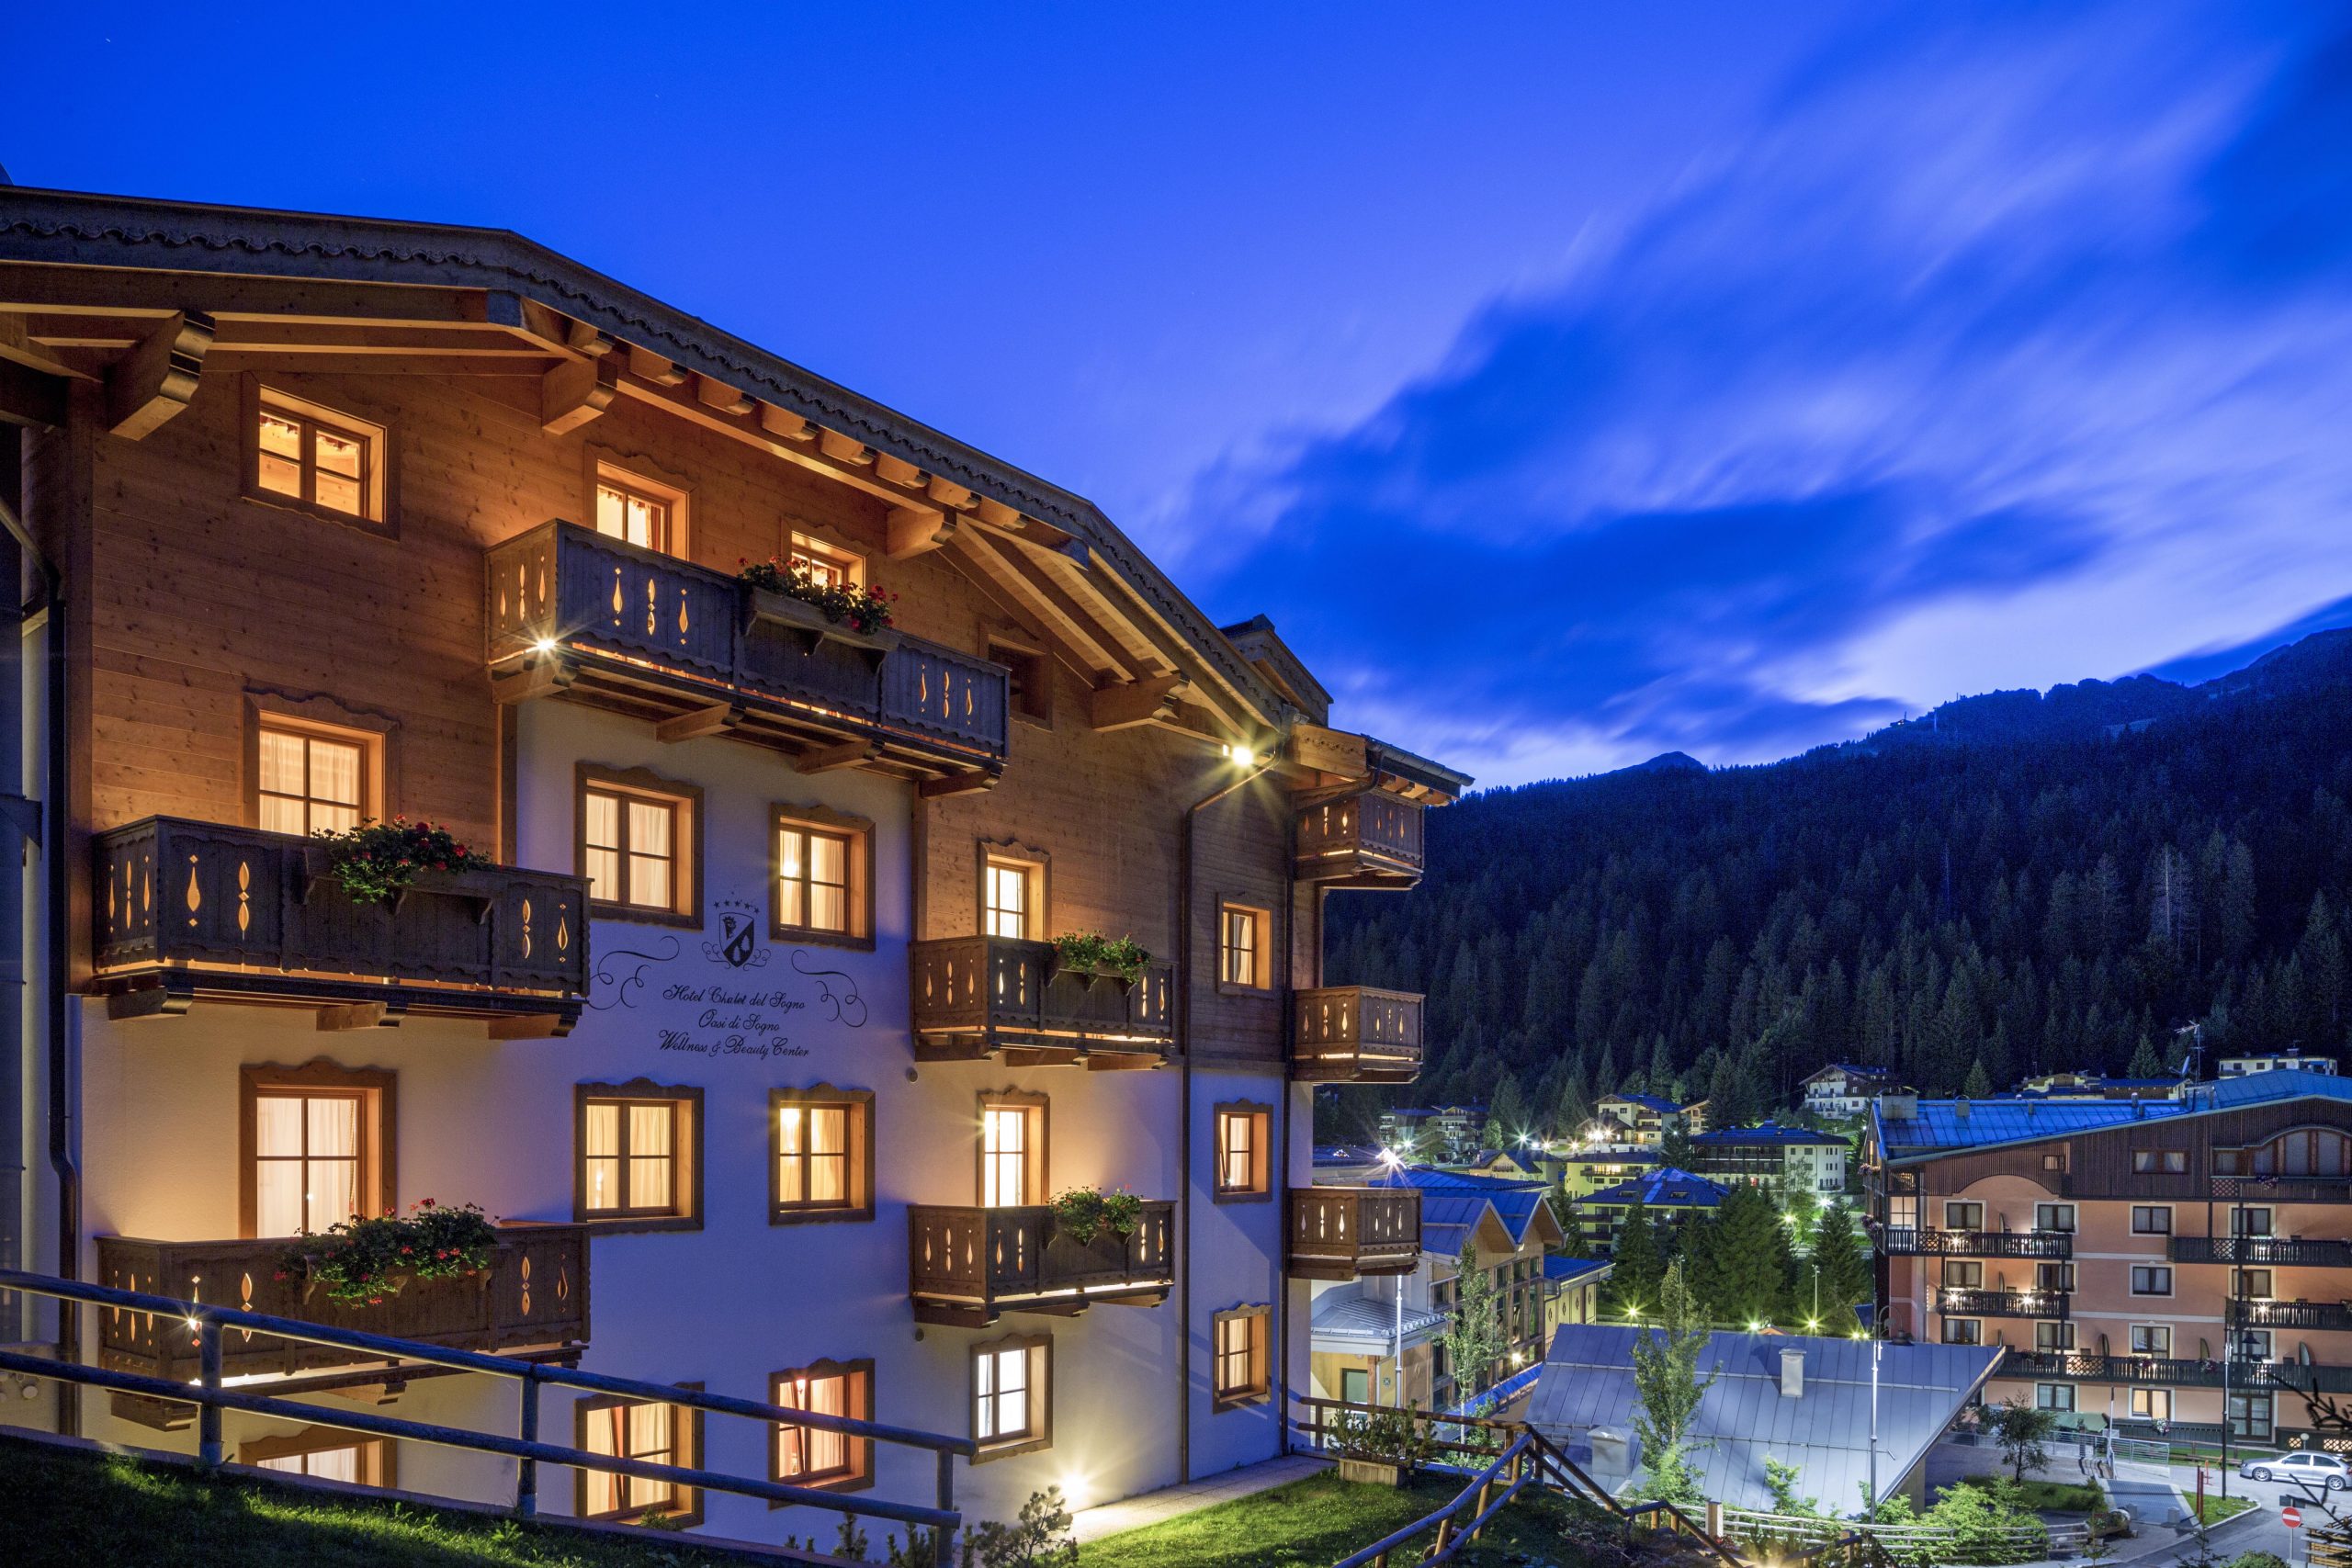 Introducing Hotel Chalet del Sogno